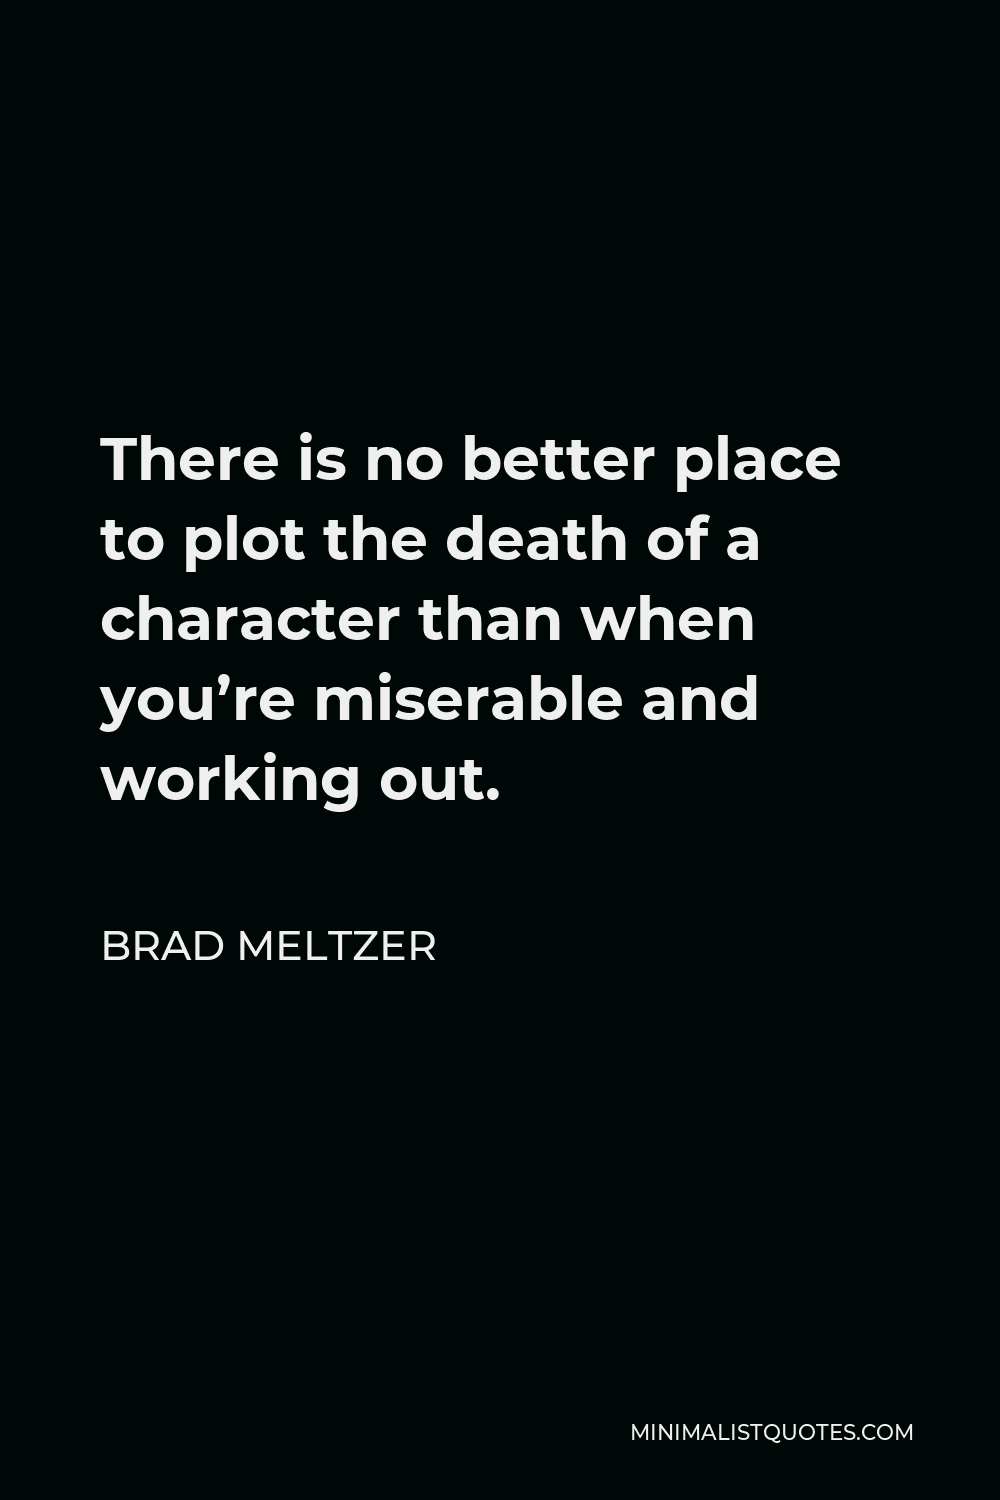 Brad Meltzer Quote - There is no better place to plot the death of a character than when you’re miserable and working out.